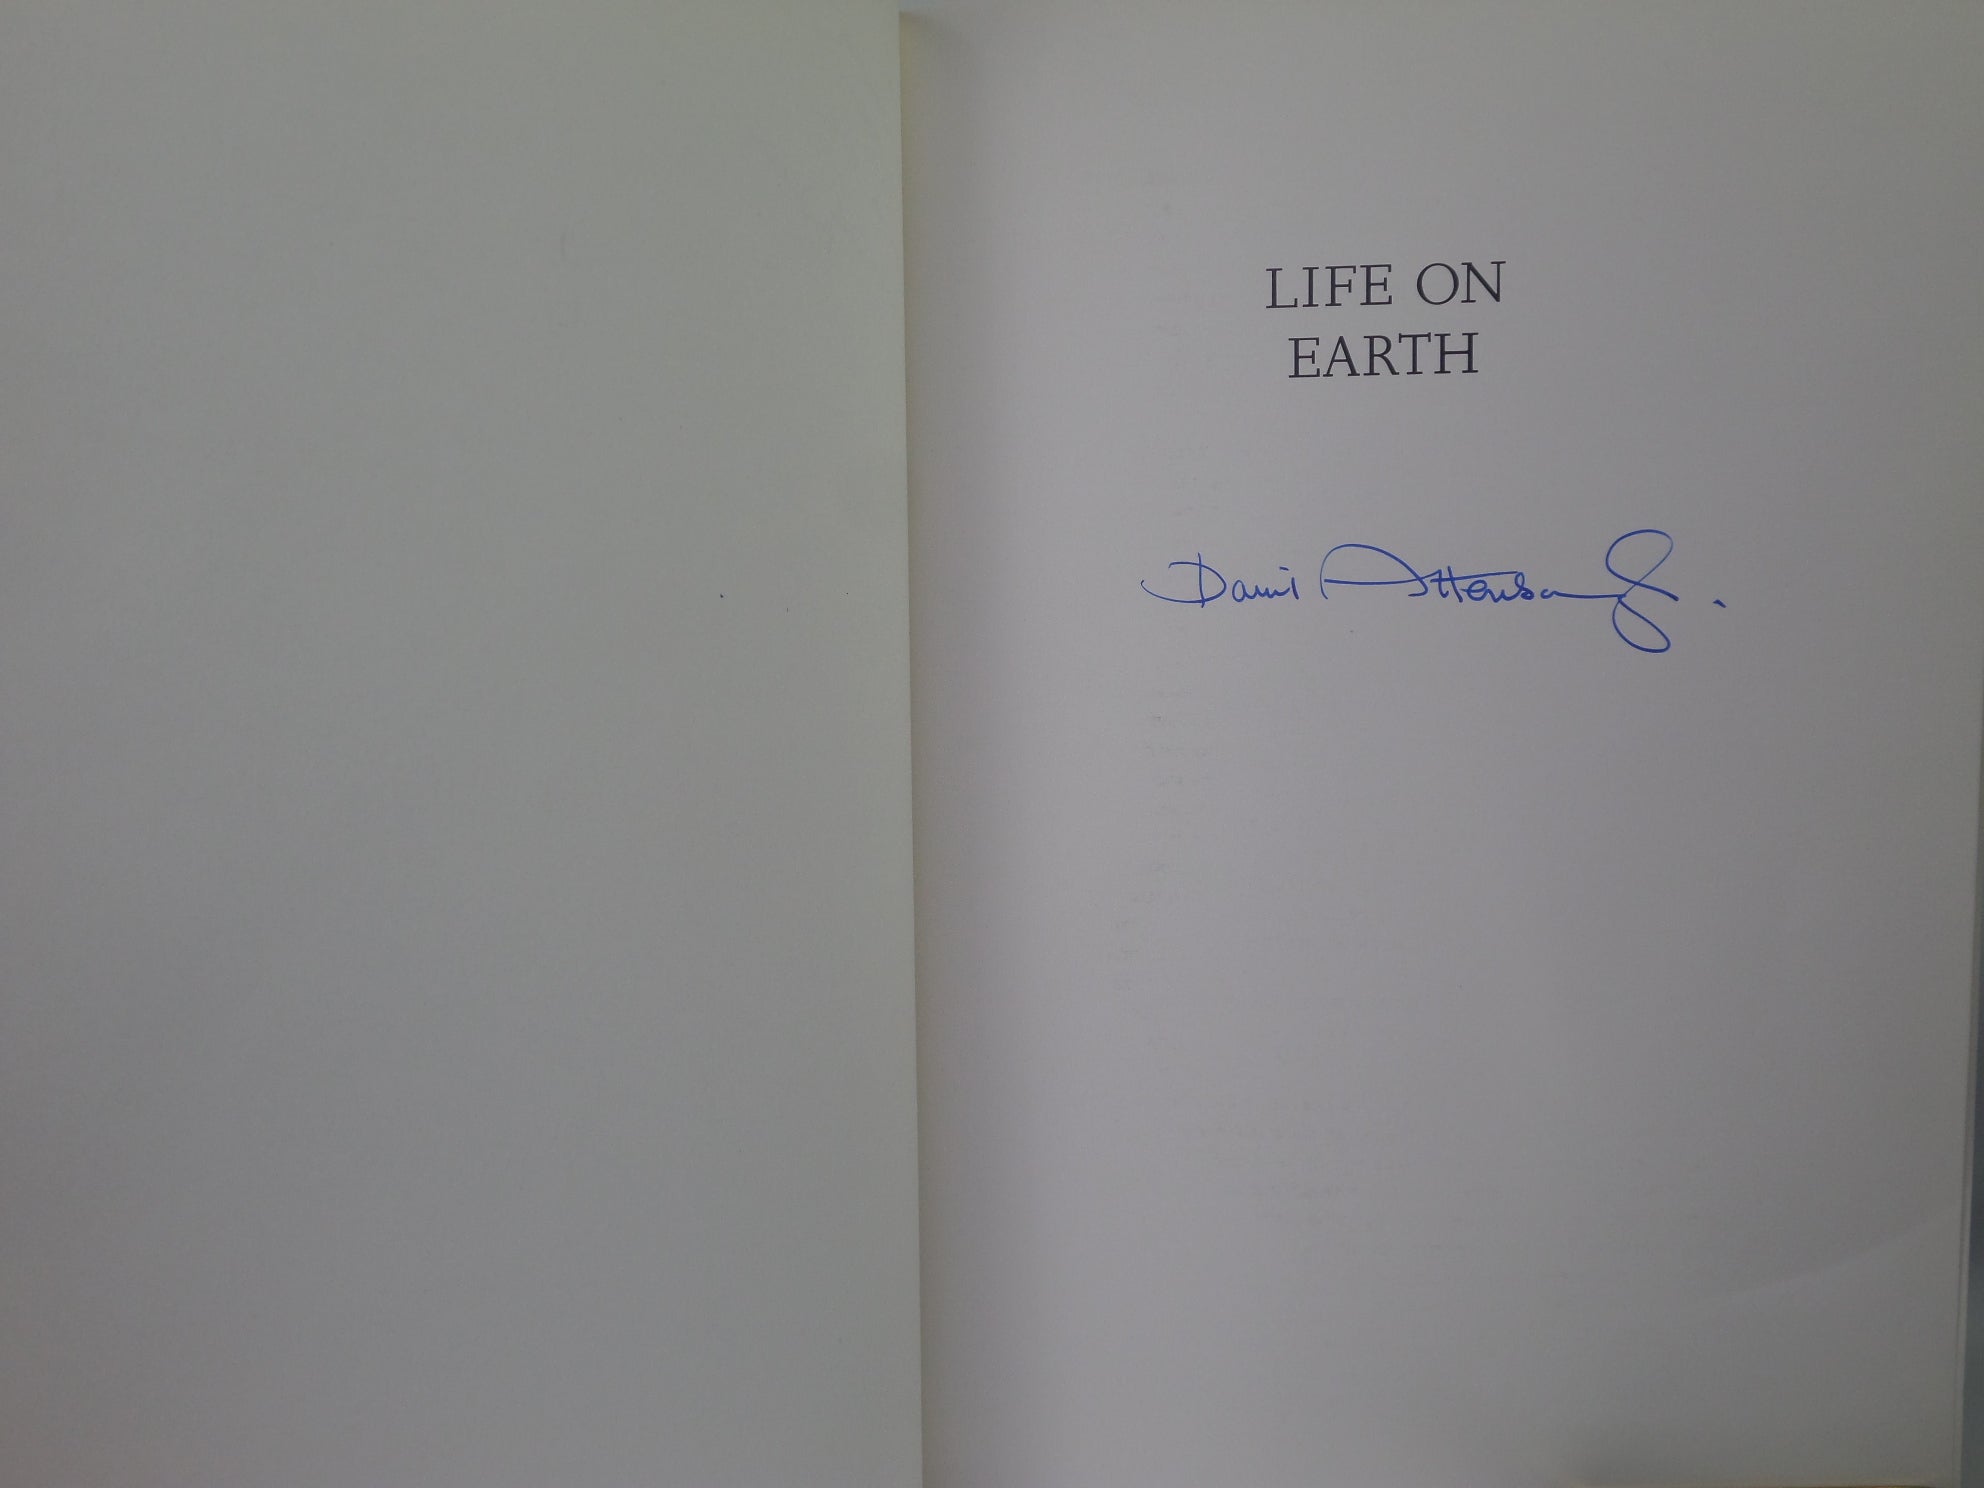 LIFE ON EARTH BY SIR DAVID ATTENBOROUGH 1984 HARDCOVER SIGNED BY AUTHOR